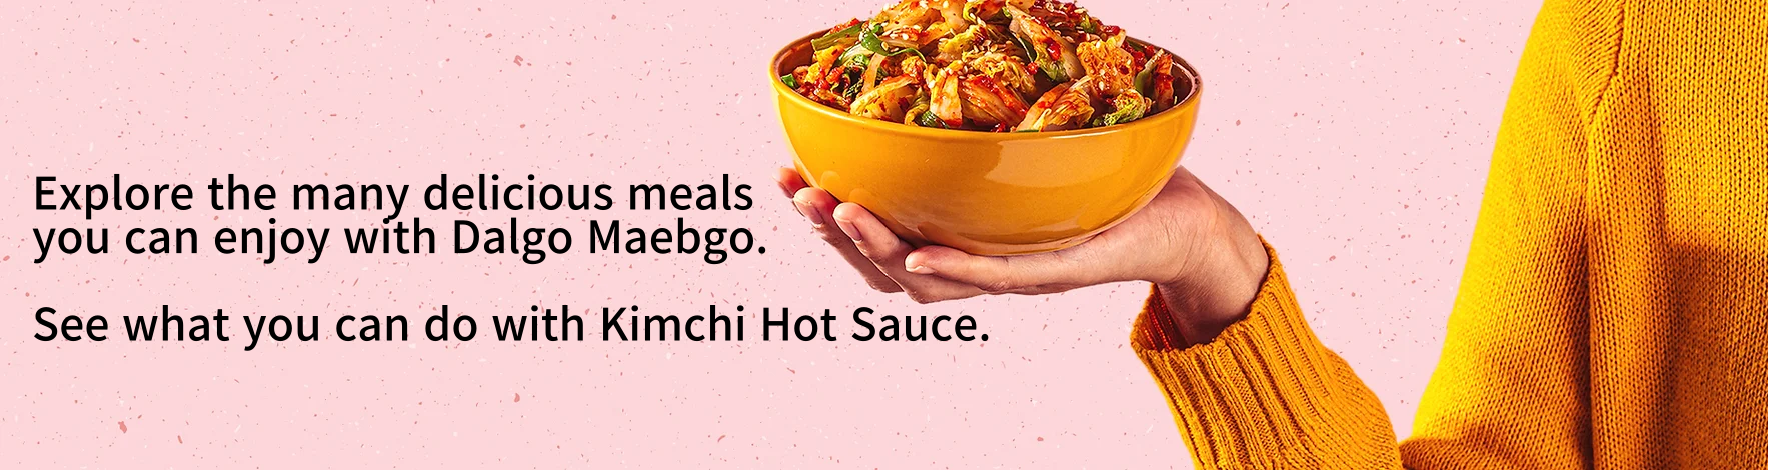 Explore the many delicious meals you can enjoy with DALGO MEABGO. See what you can do with Kimchi Hot Sauce.